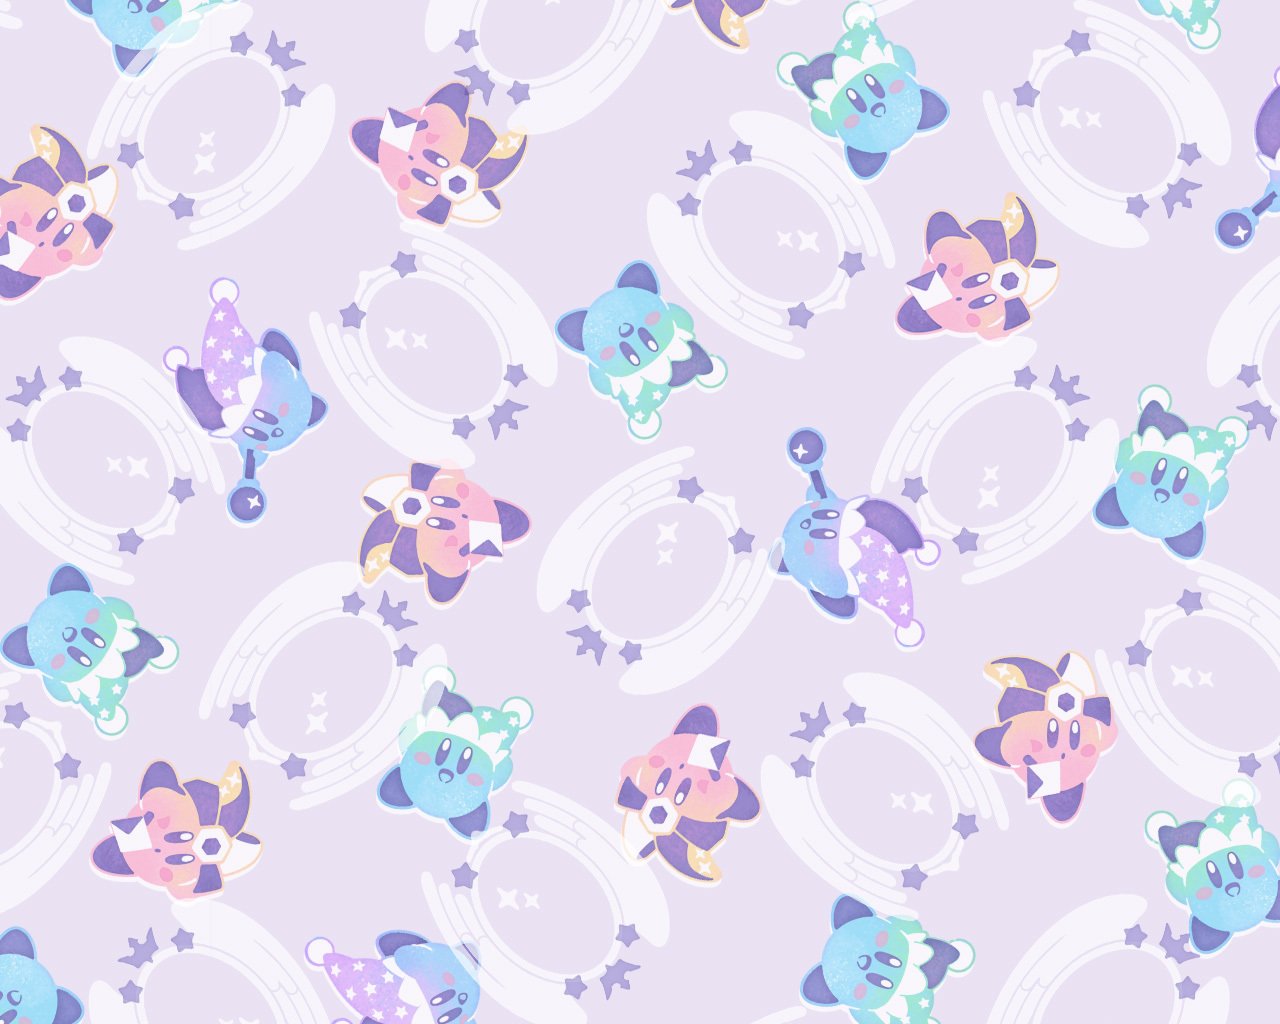 Nintendo of America the Mirror ability winning round 1 of the #Kirby Battle Royale Copy Ability Poll with this cute wallpaper!